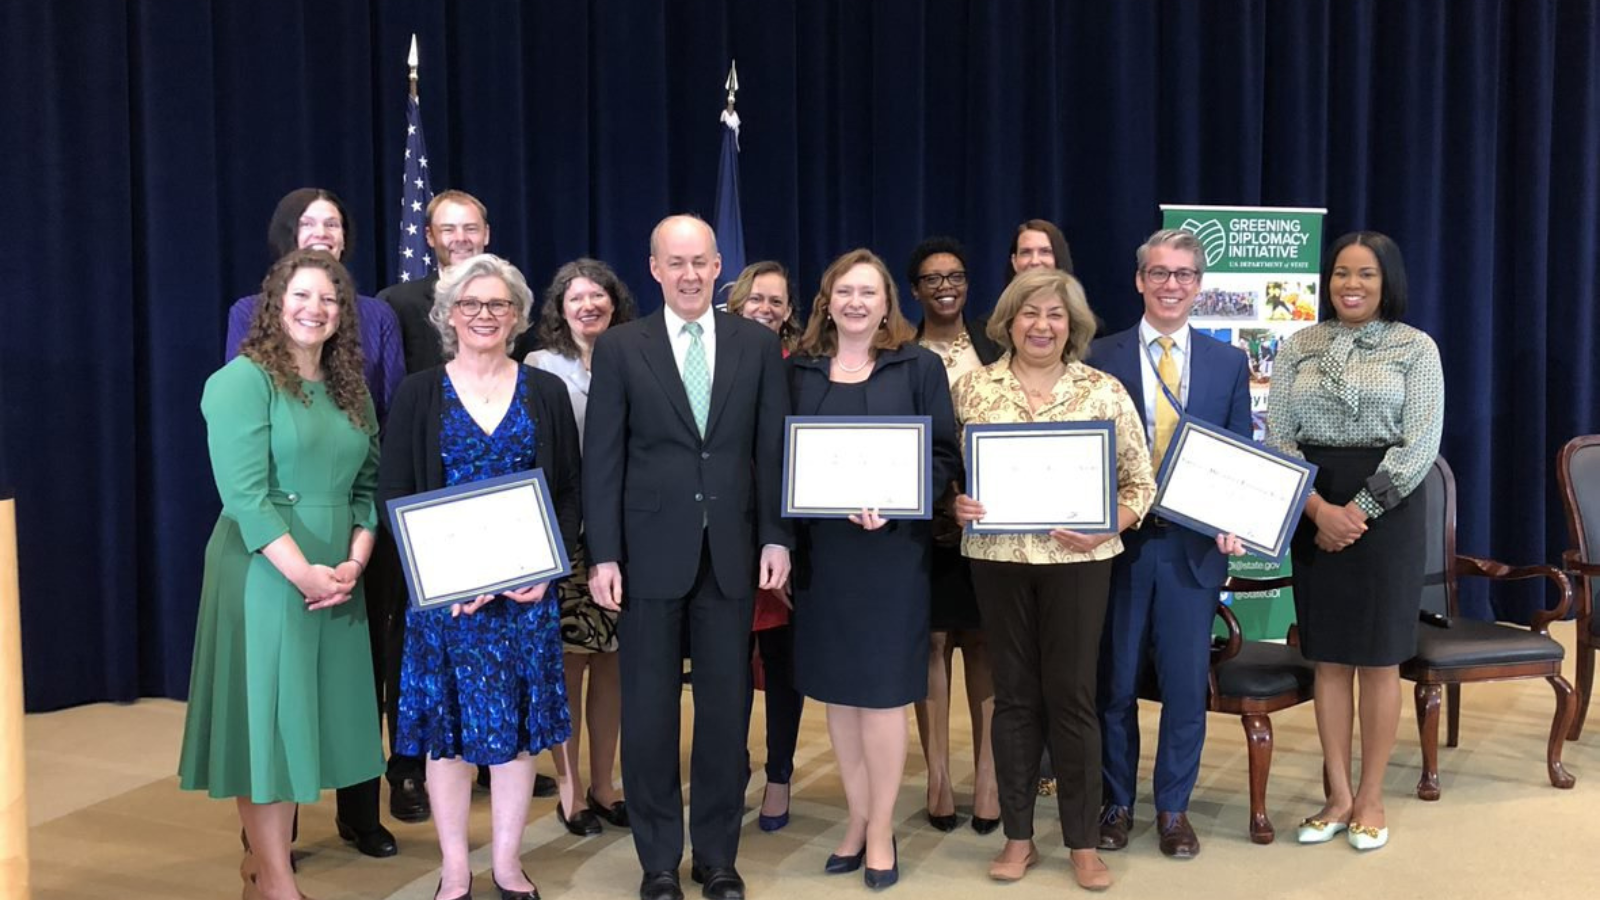 Deputy Secretary for Management and Resources McKeon stands with the winners of the 2022 Greening Diplomacy Initiative Awards, four individuals are holding certificates and an American and Department of State flag are featured in the background.